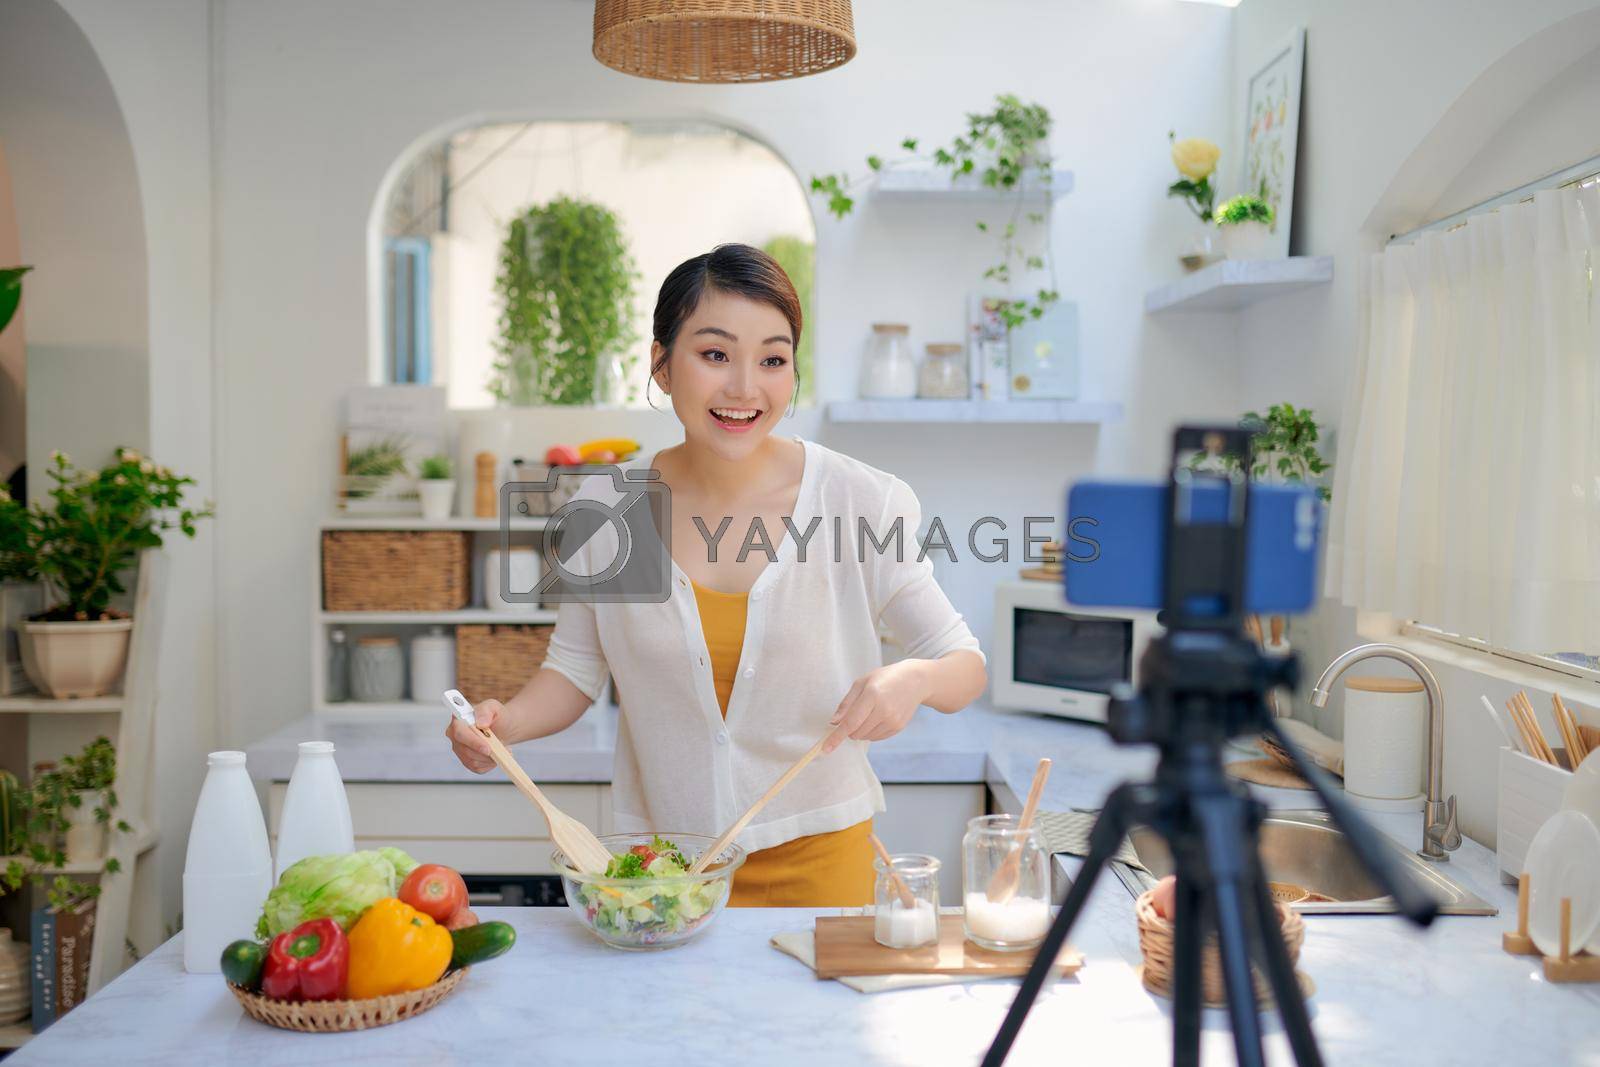 Royalty free image of Asian woman recording a video blog by makidotvn